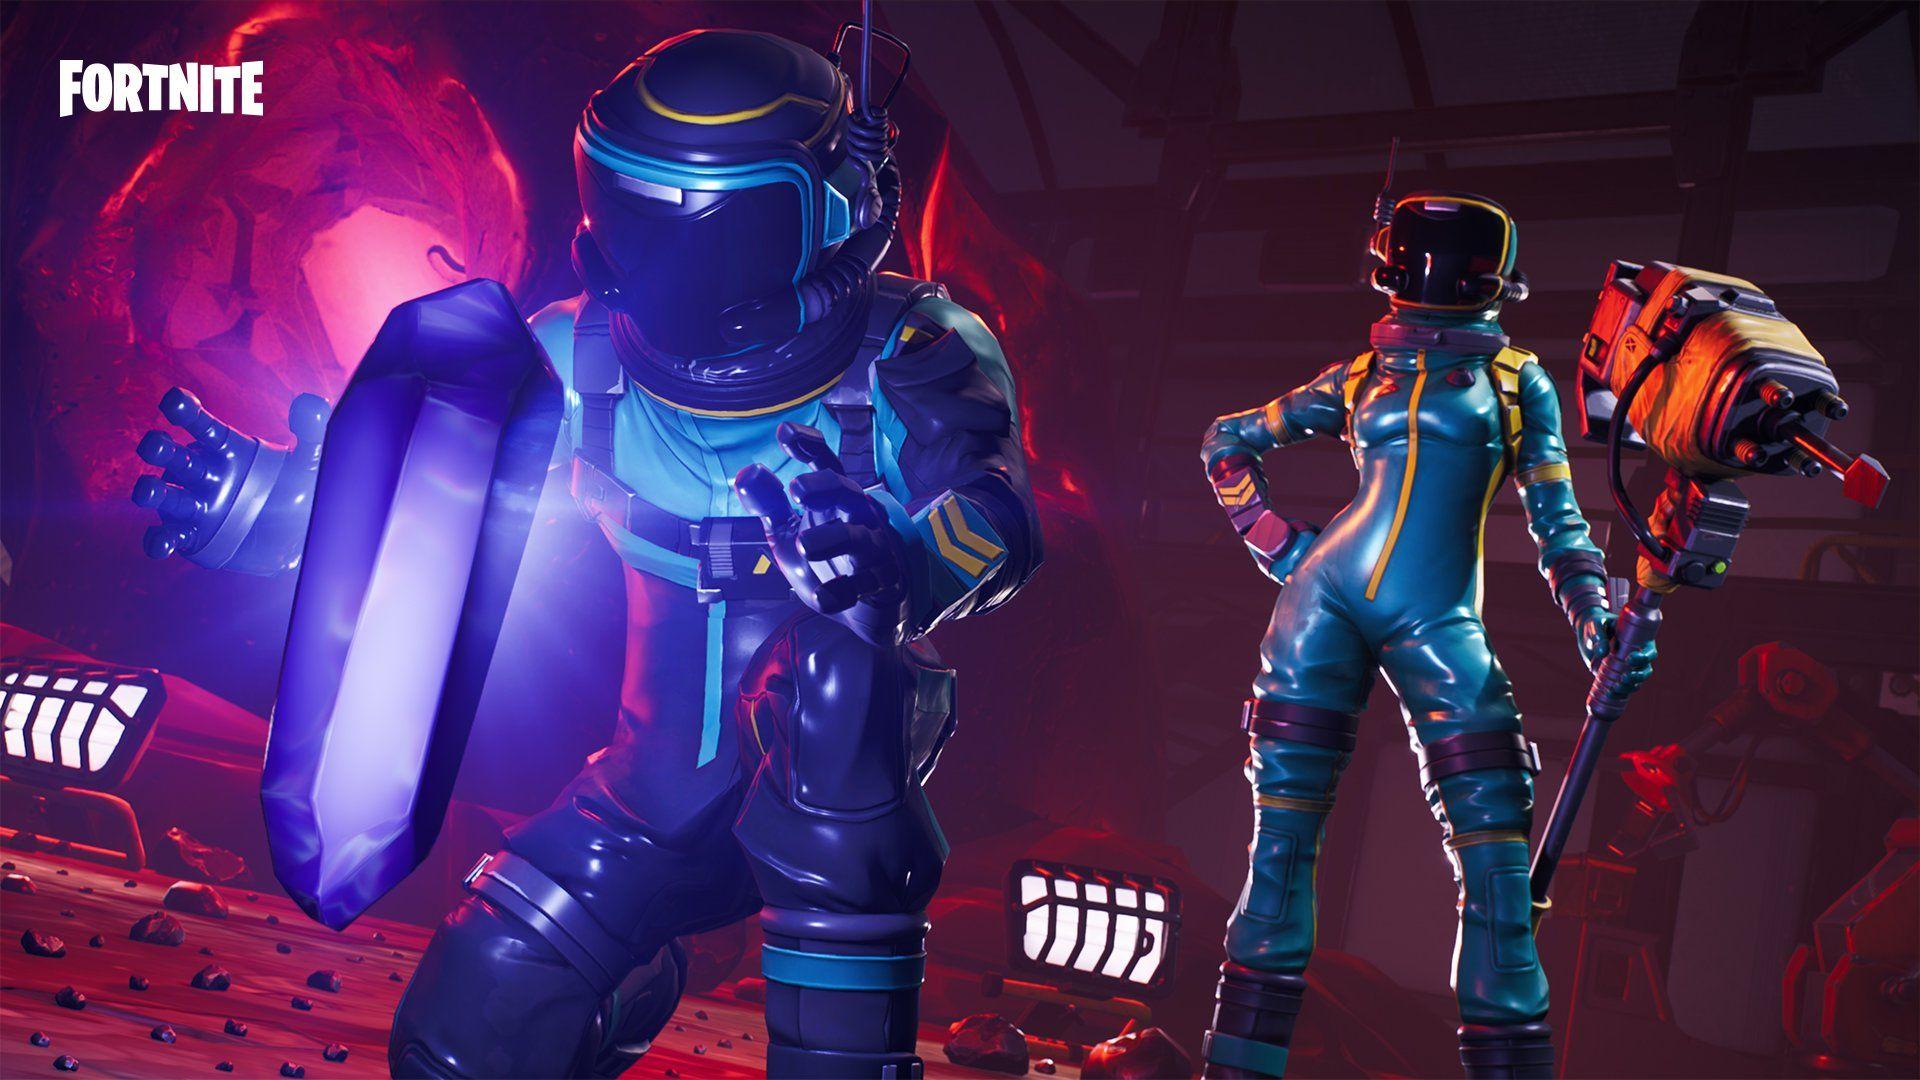 Fortnite: Battle Royale Skins free and premium outfits